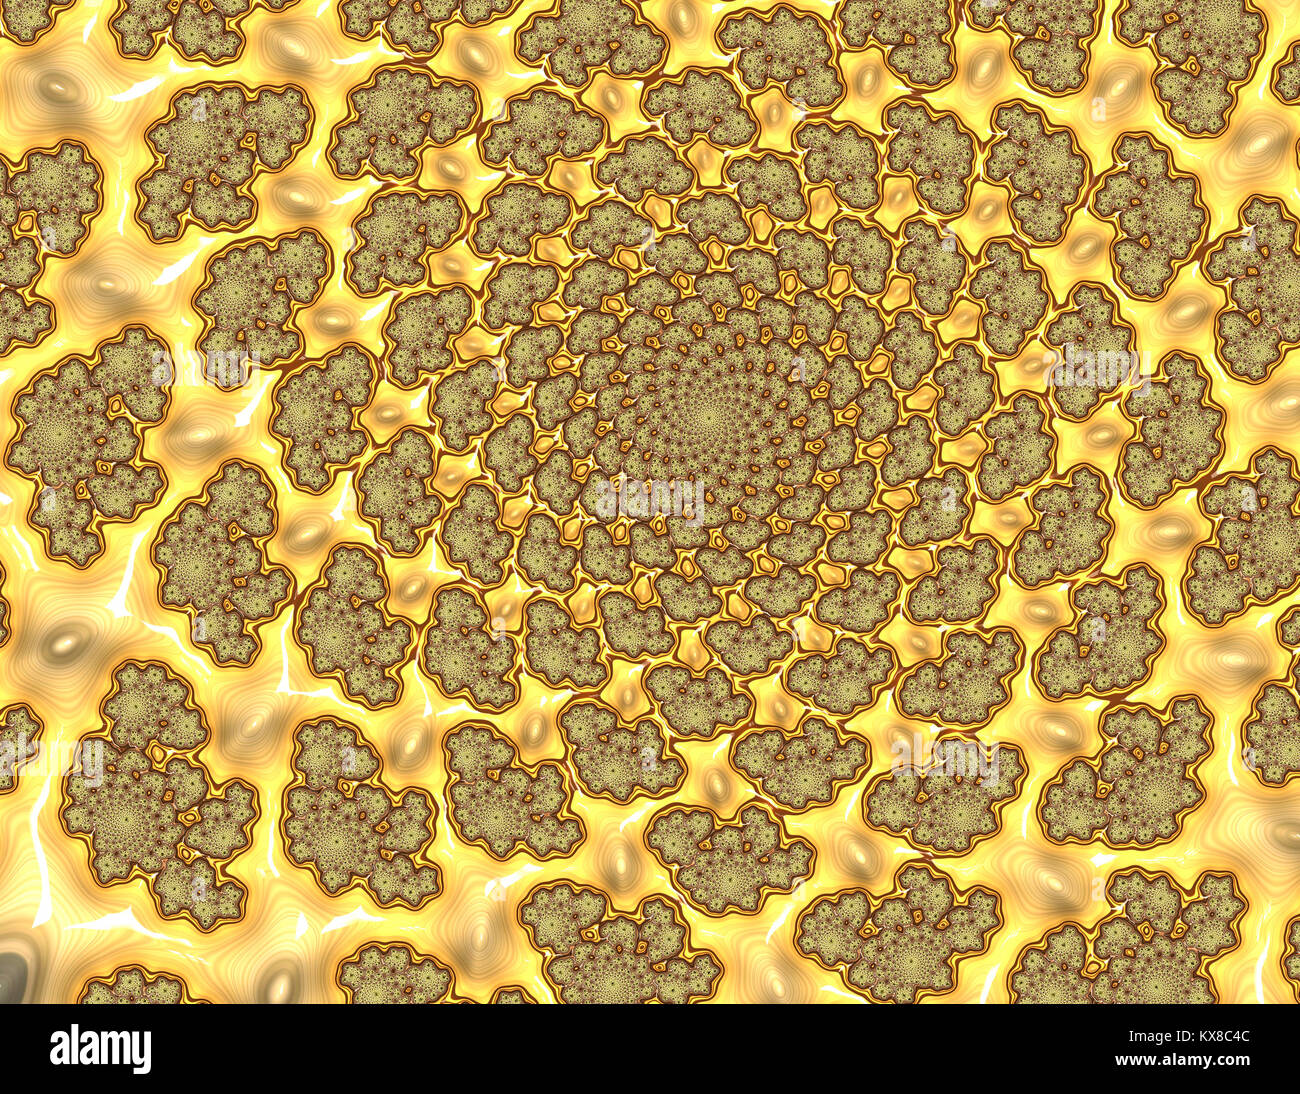 Fractal Blobs - Odd shaped blobs circling on a golden background Stock Photo